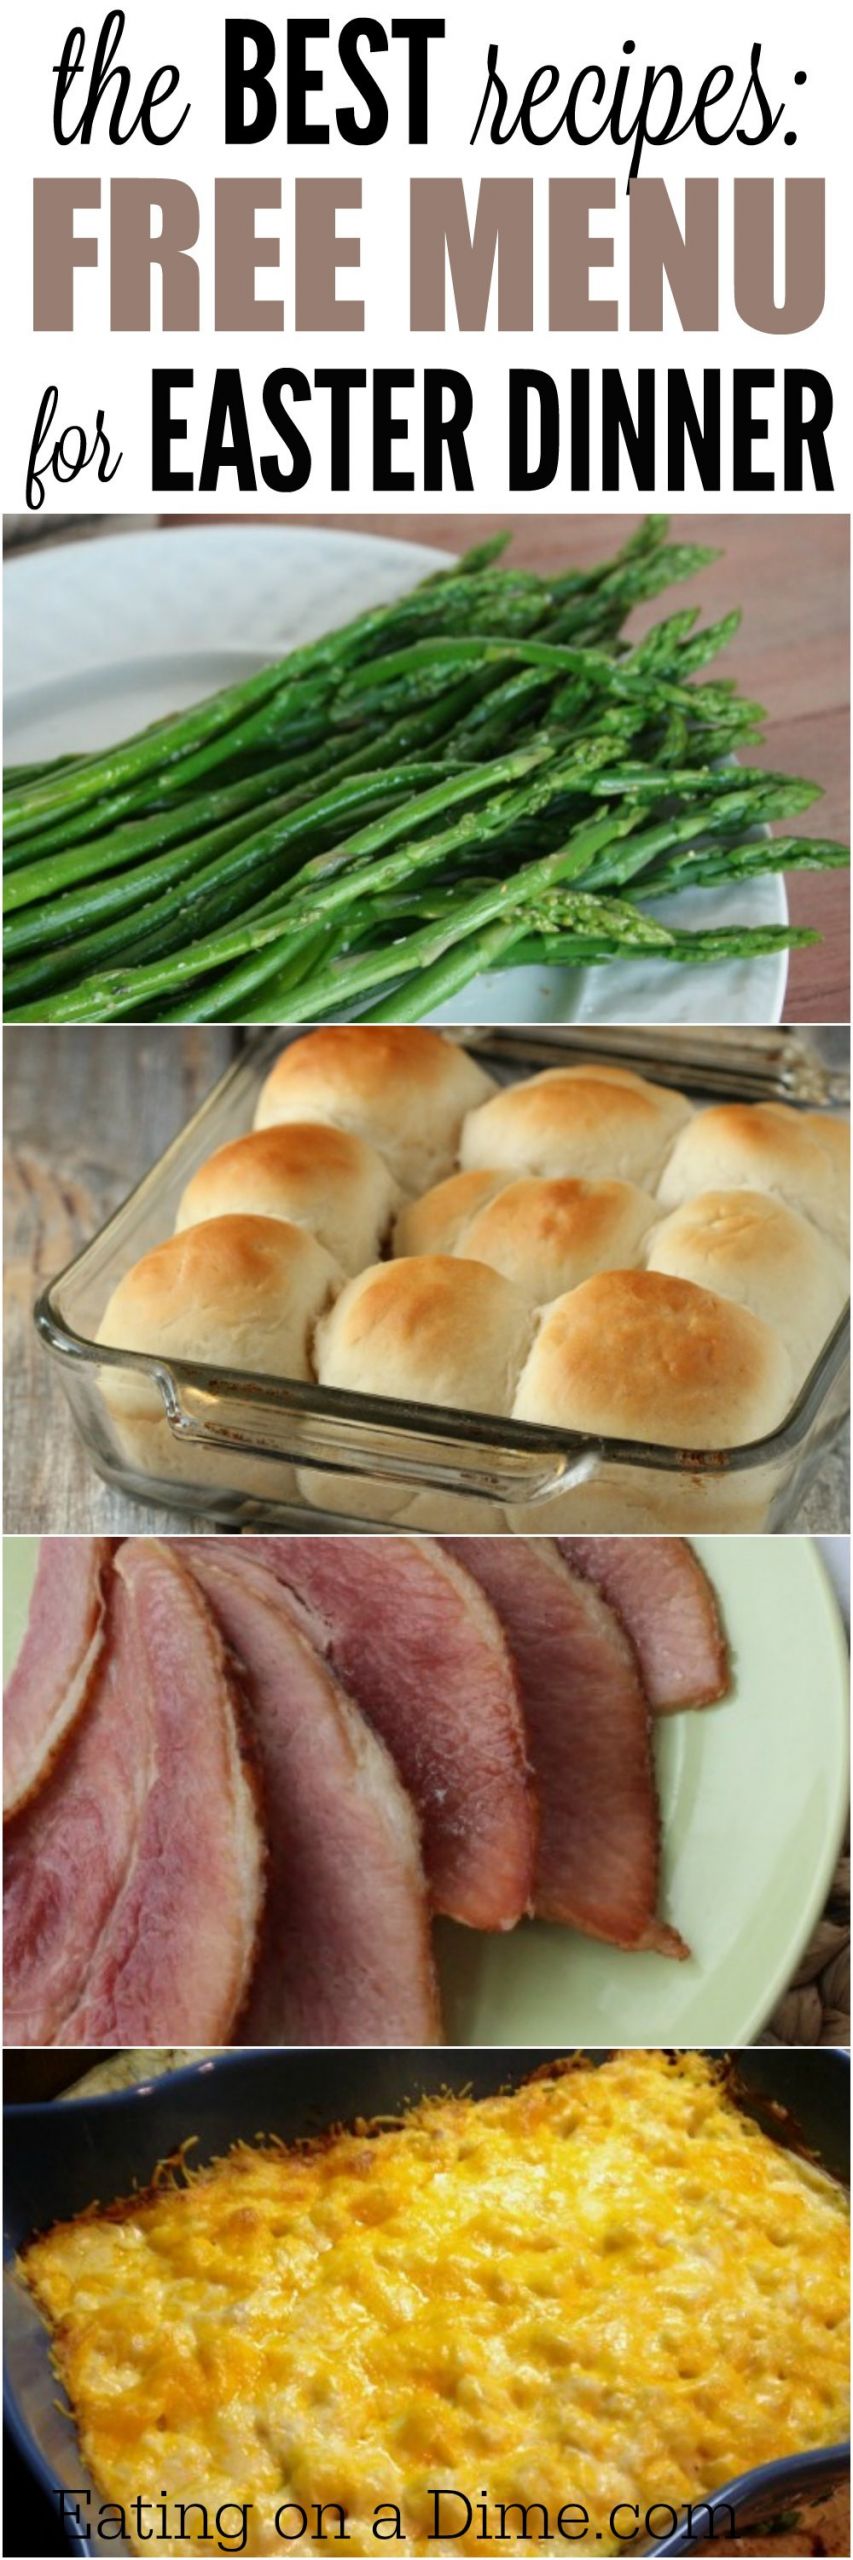 Ideas For Easter Dinner Menu
 Easter Menu Ideas and Recipes The Best Easter Dinner recipes